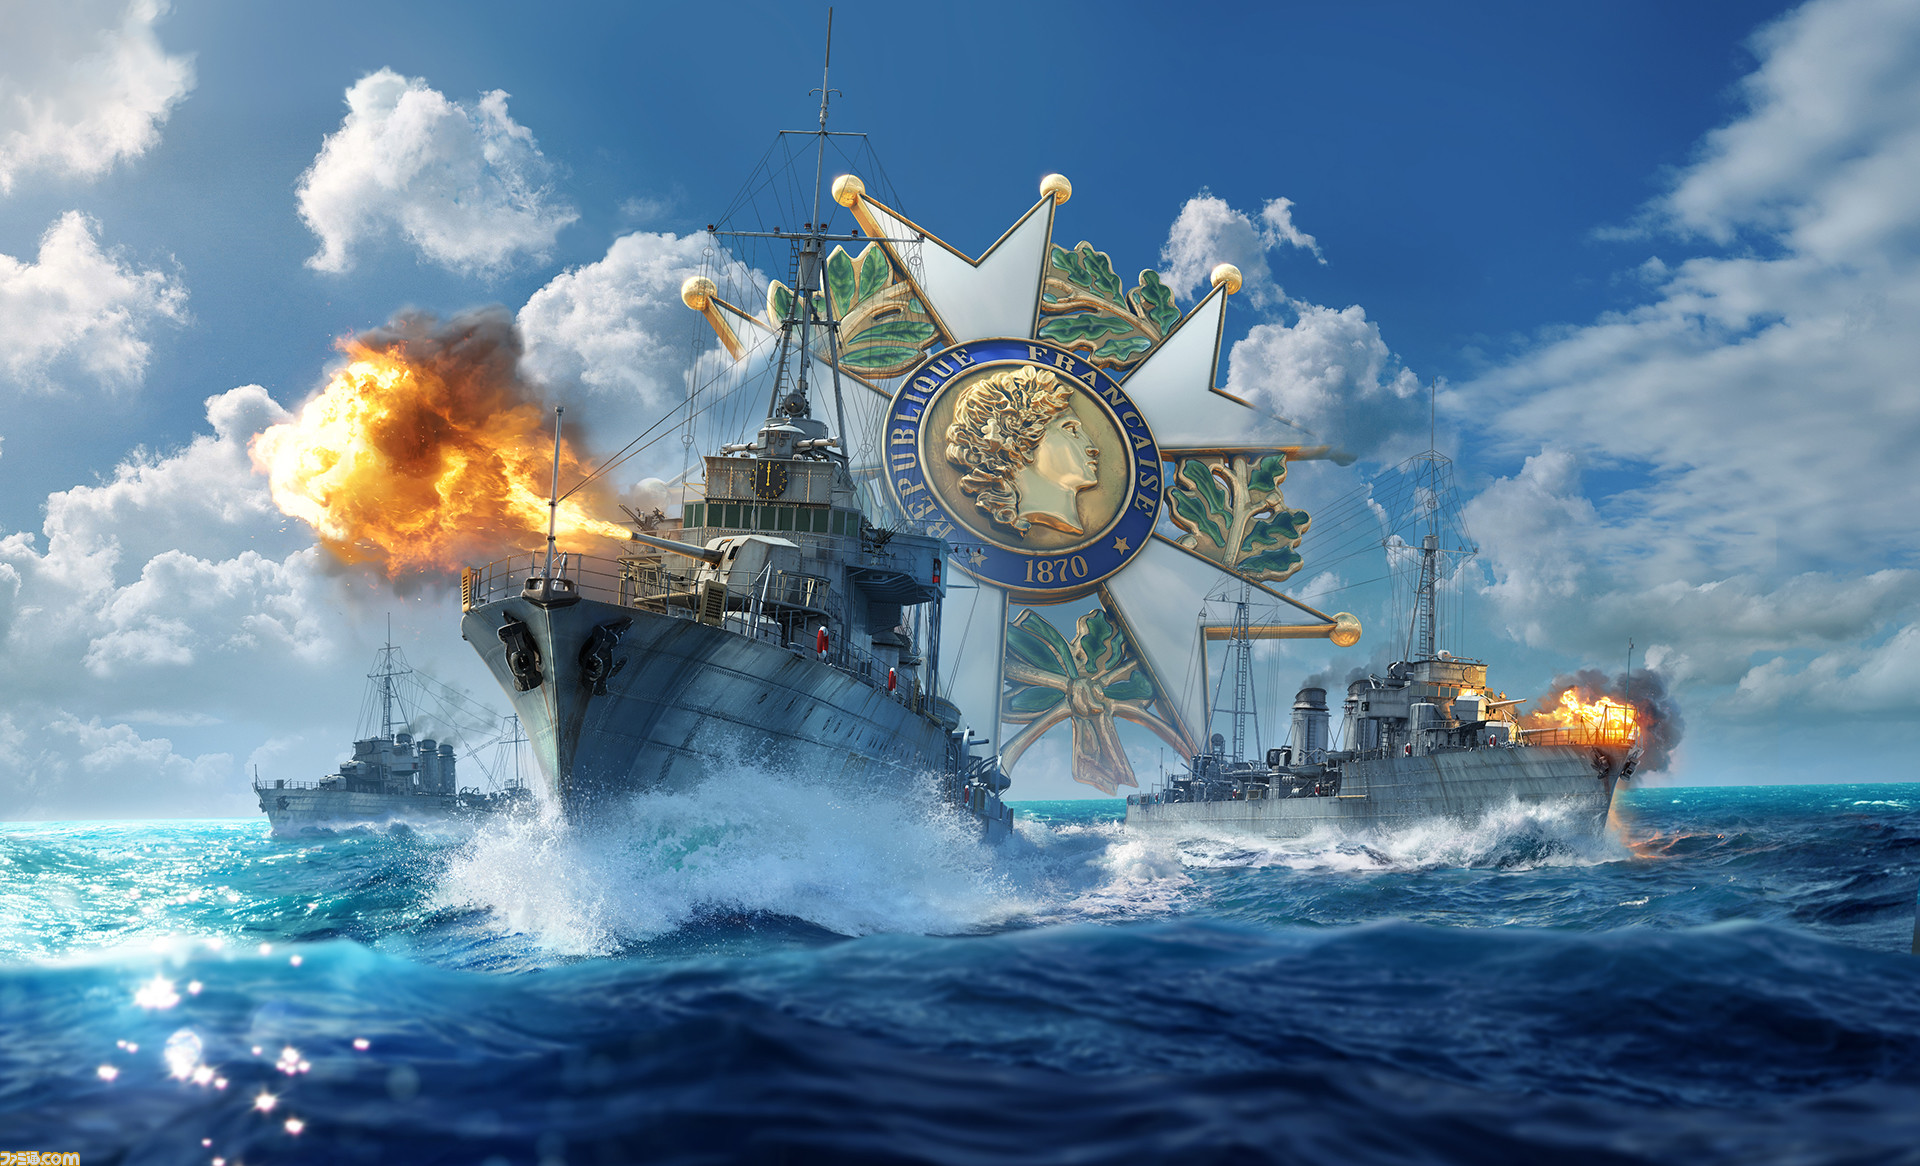 Wows の検索結果 ゲームの入口